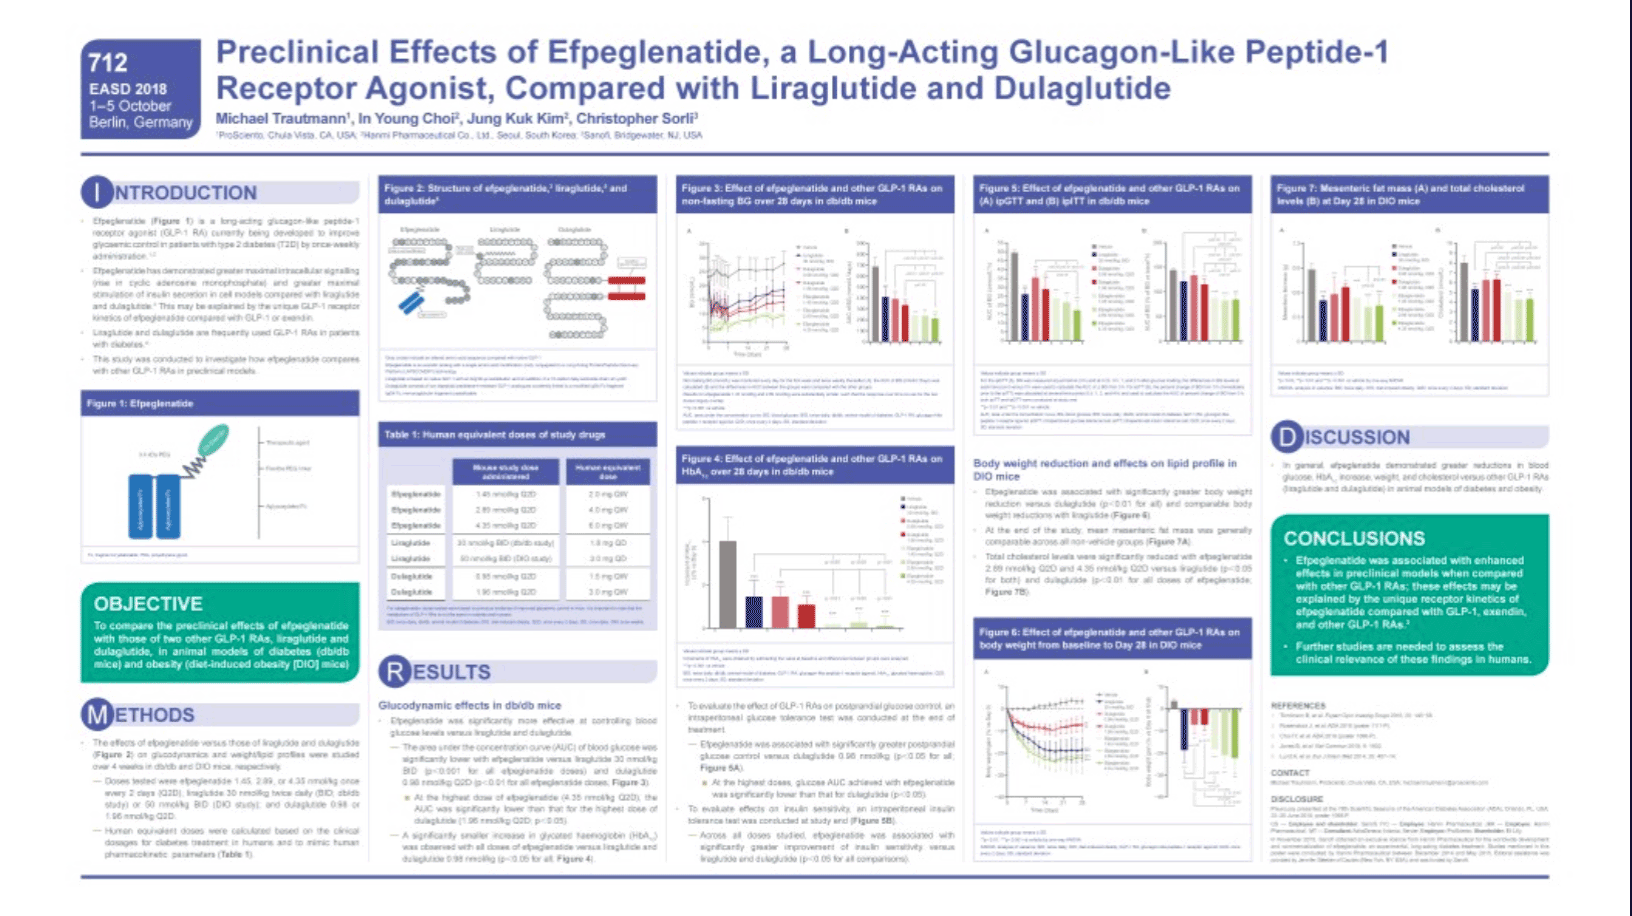 Preclinical Effects of Efpeglenatide, a Long-Acting Glucagon-Like Peptide-1 Receptor Agonist, Compared with Liraglutide and Dulaglutide thumbnail